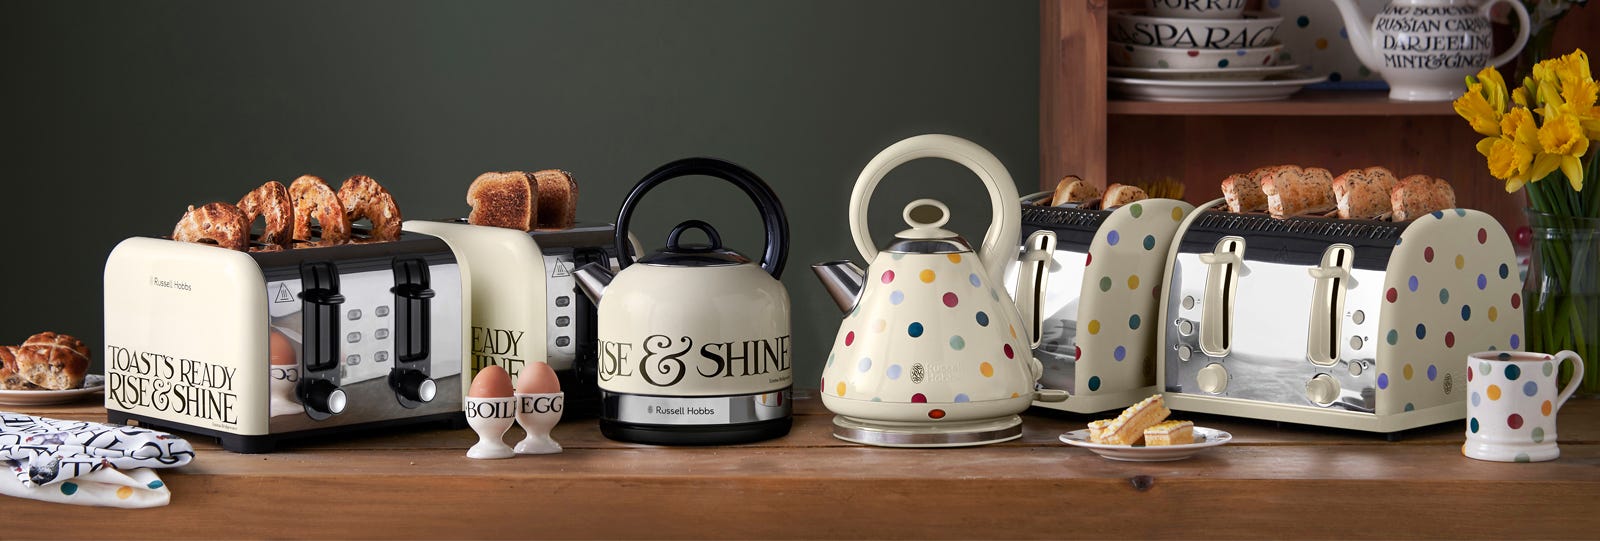 3000 W Russell Hobbs 23907 Emma Bridgewater Kettle Black Toast Cordless Electric Kettle Toast and Marmalade 